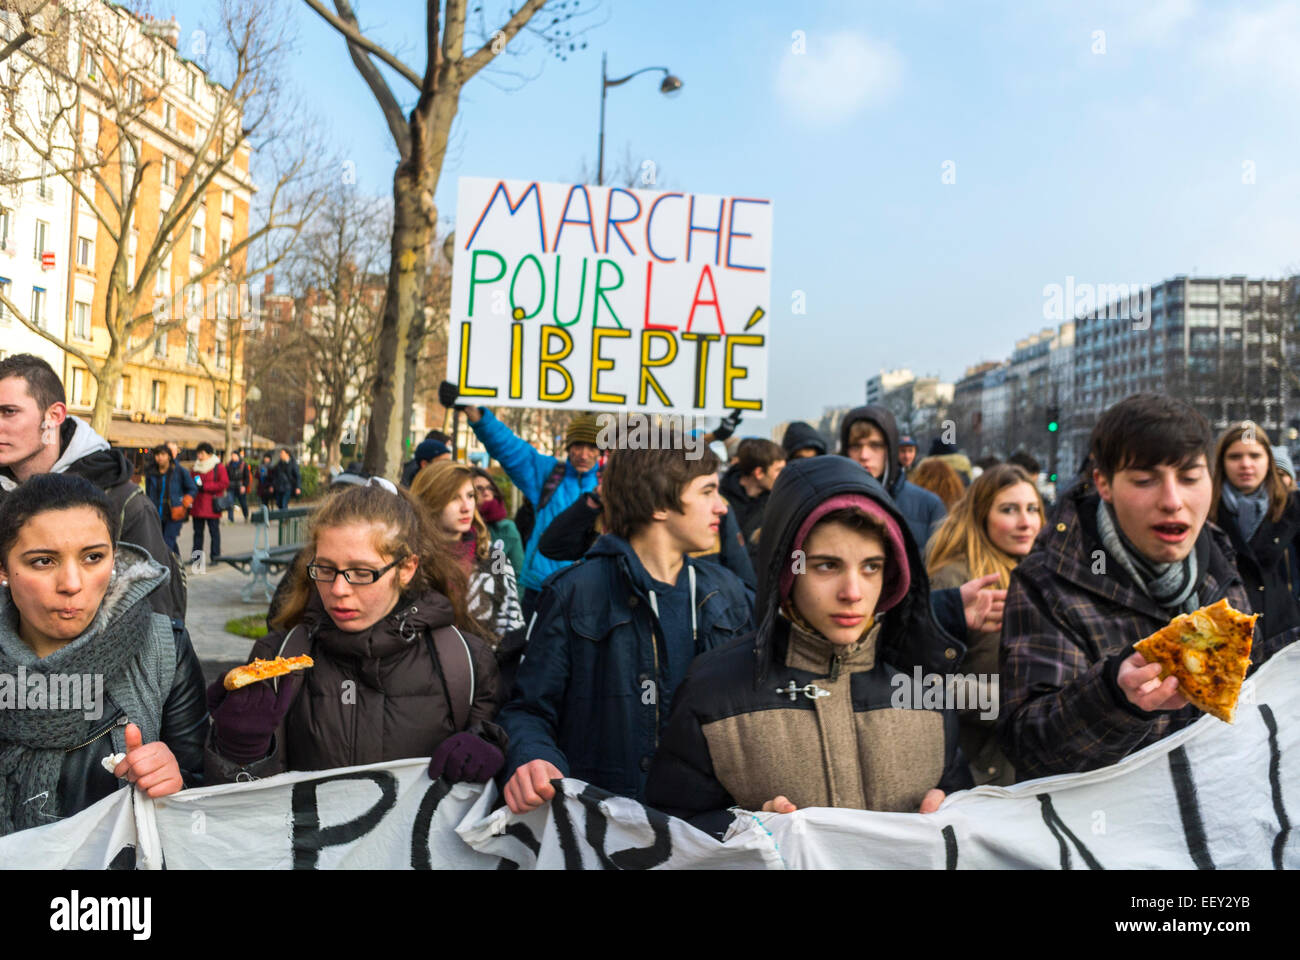 Paris, France French High Scho-ol Students March from Bordeaux in Support of "Charlie Hebdo" Shooting Attack, protests, Teenagers Holding Protest Banners, "je suis Charlie paris" Stock Photo